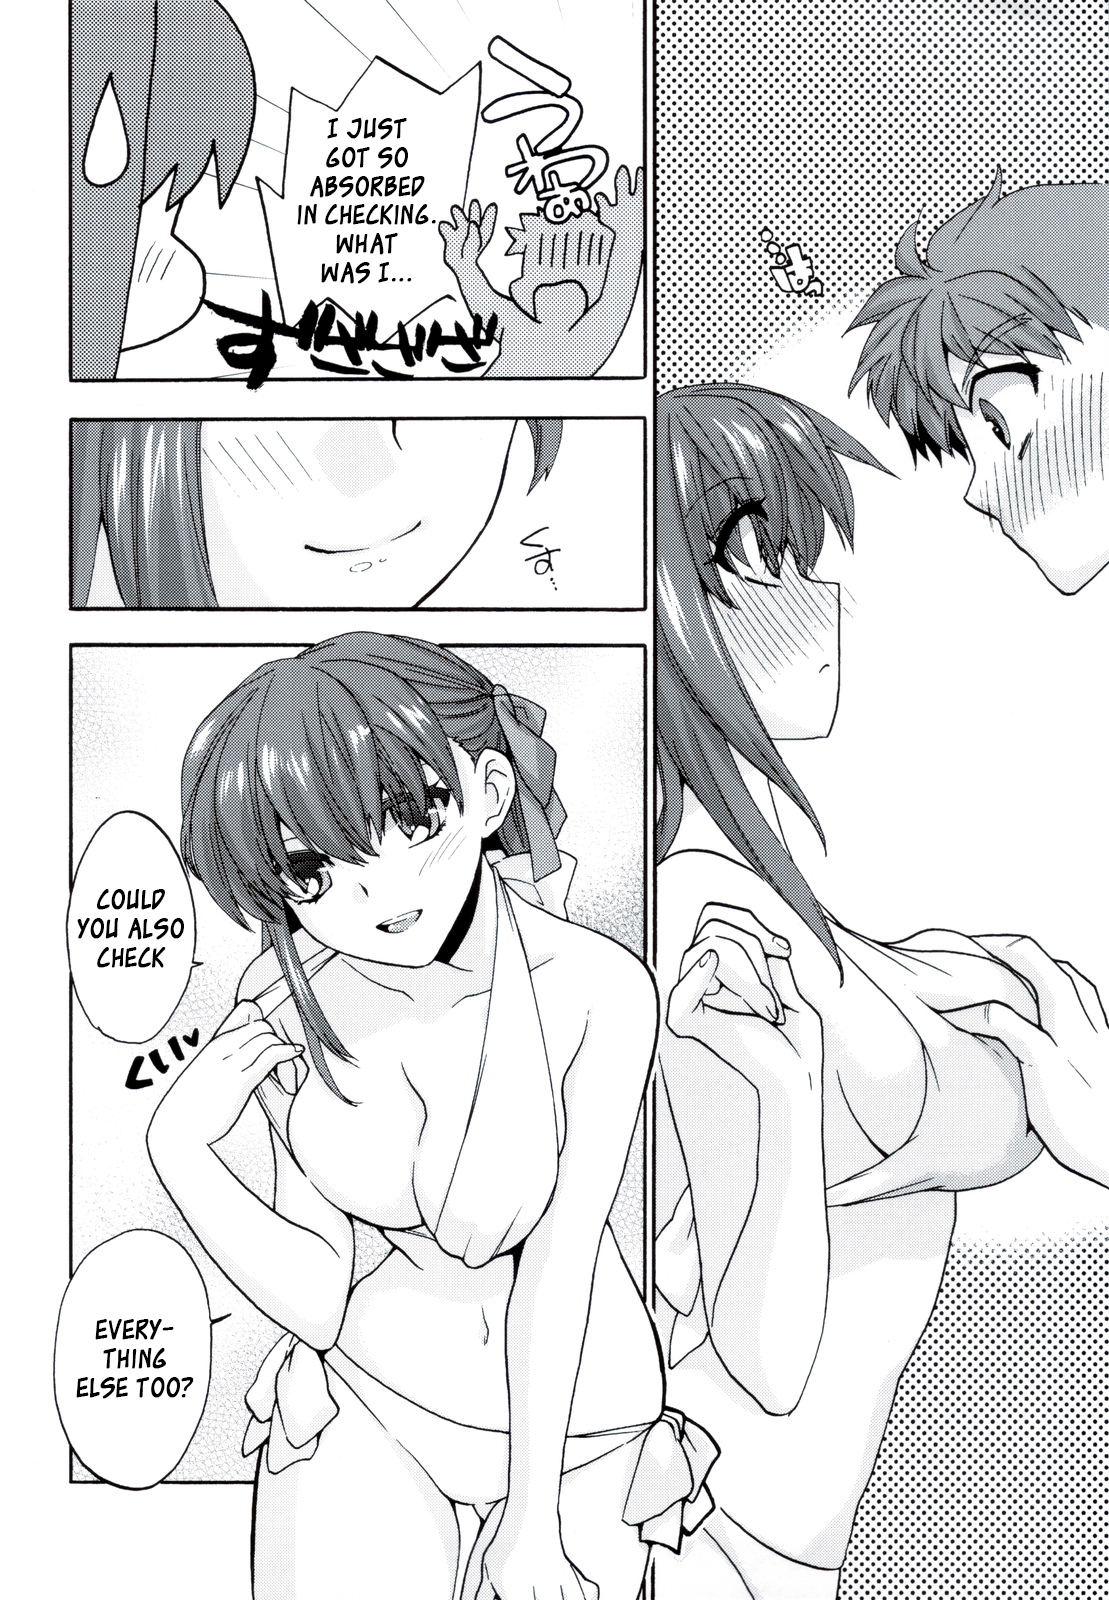 (CT20) [TRIP SPIDER (niwacho)] CareLessLy (Fate/stay night) [English] [Oppai Dreams] page 5 full